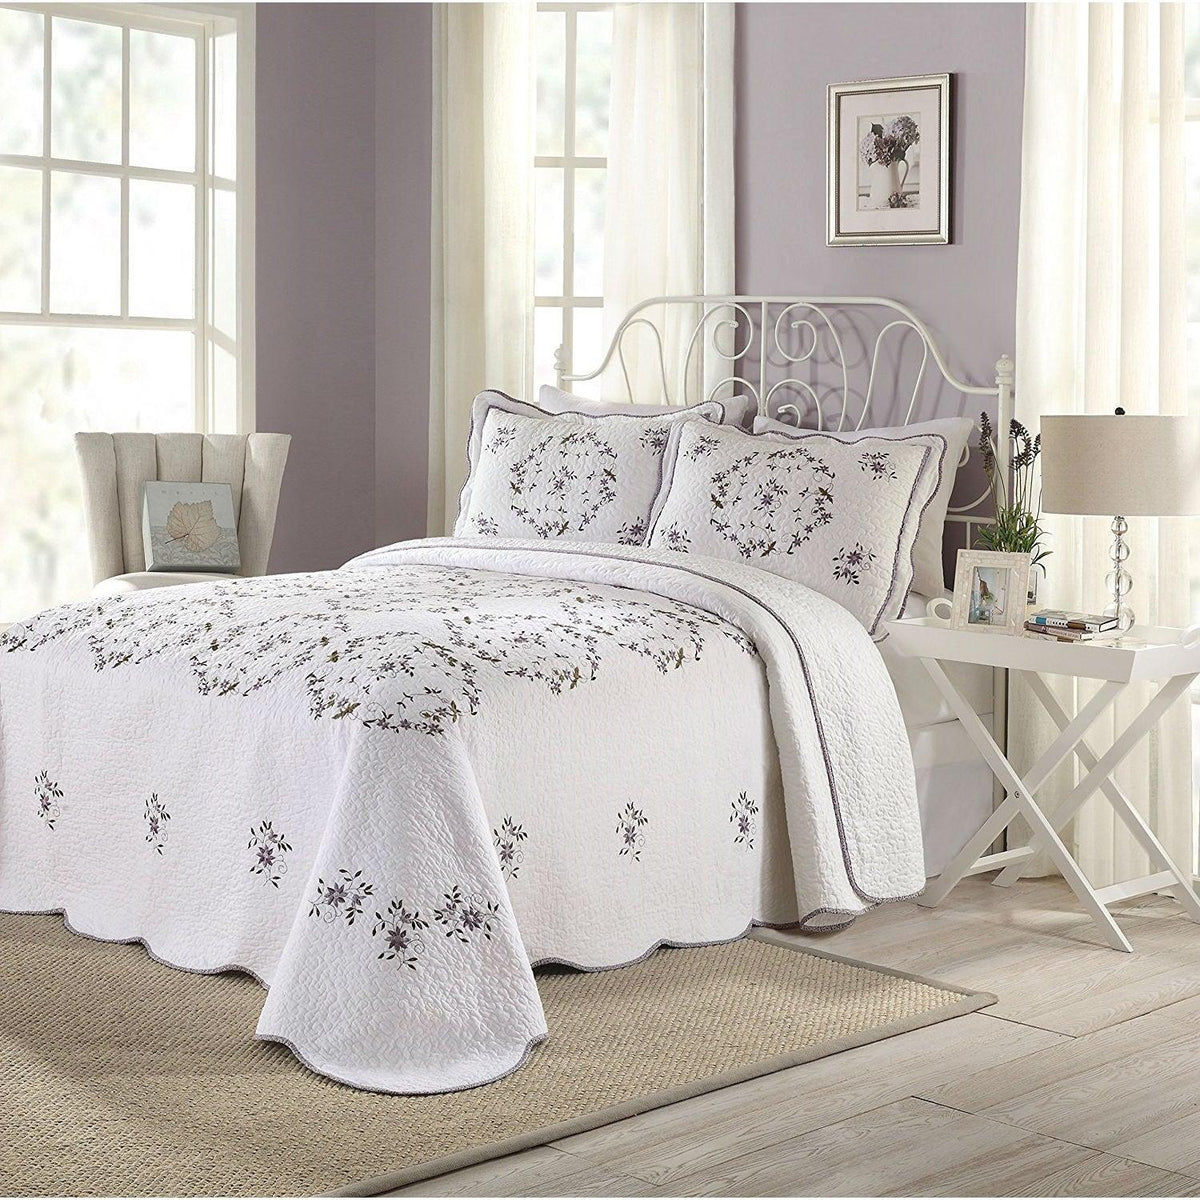 Queen size Cotton Bedspread with Scalloped Edges and Floral Print Embroidery in White